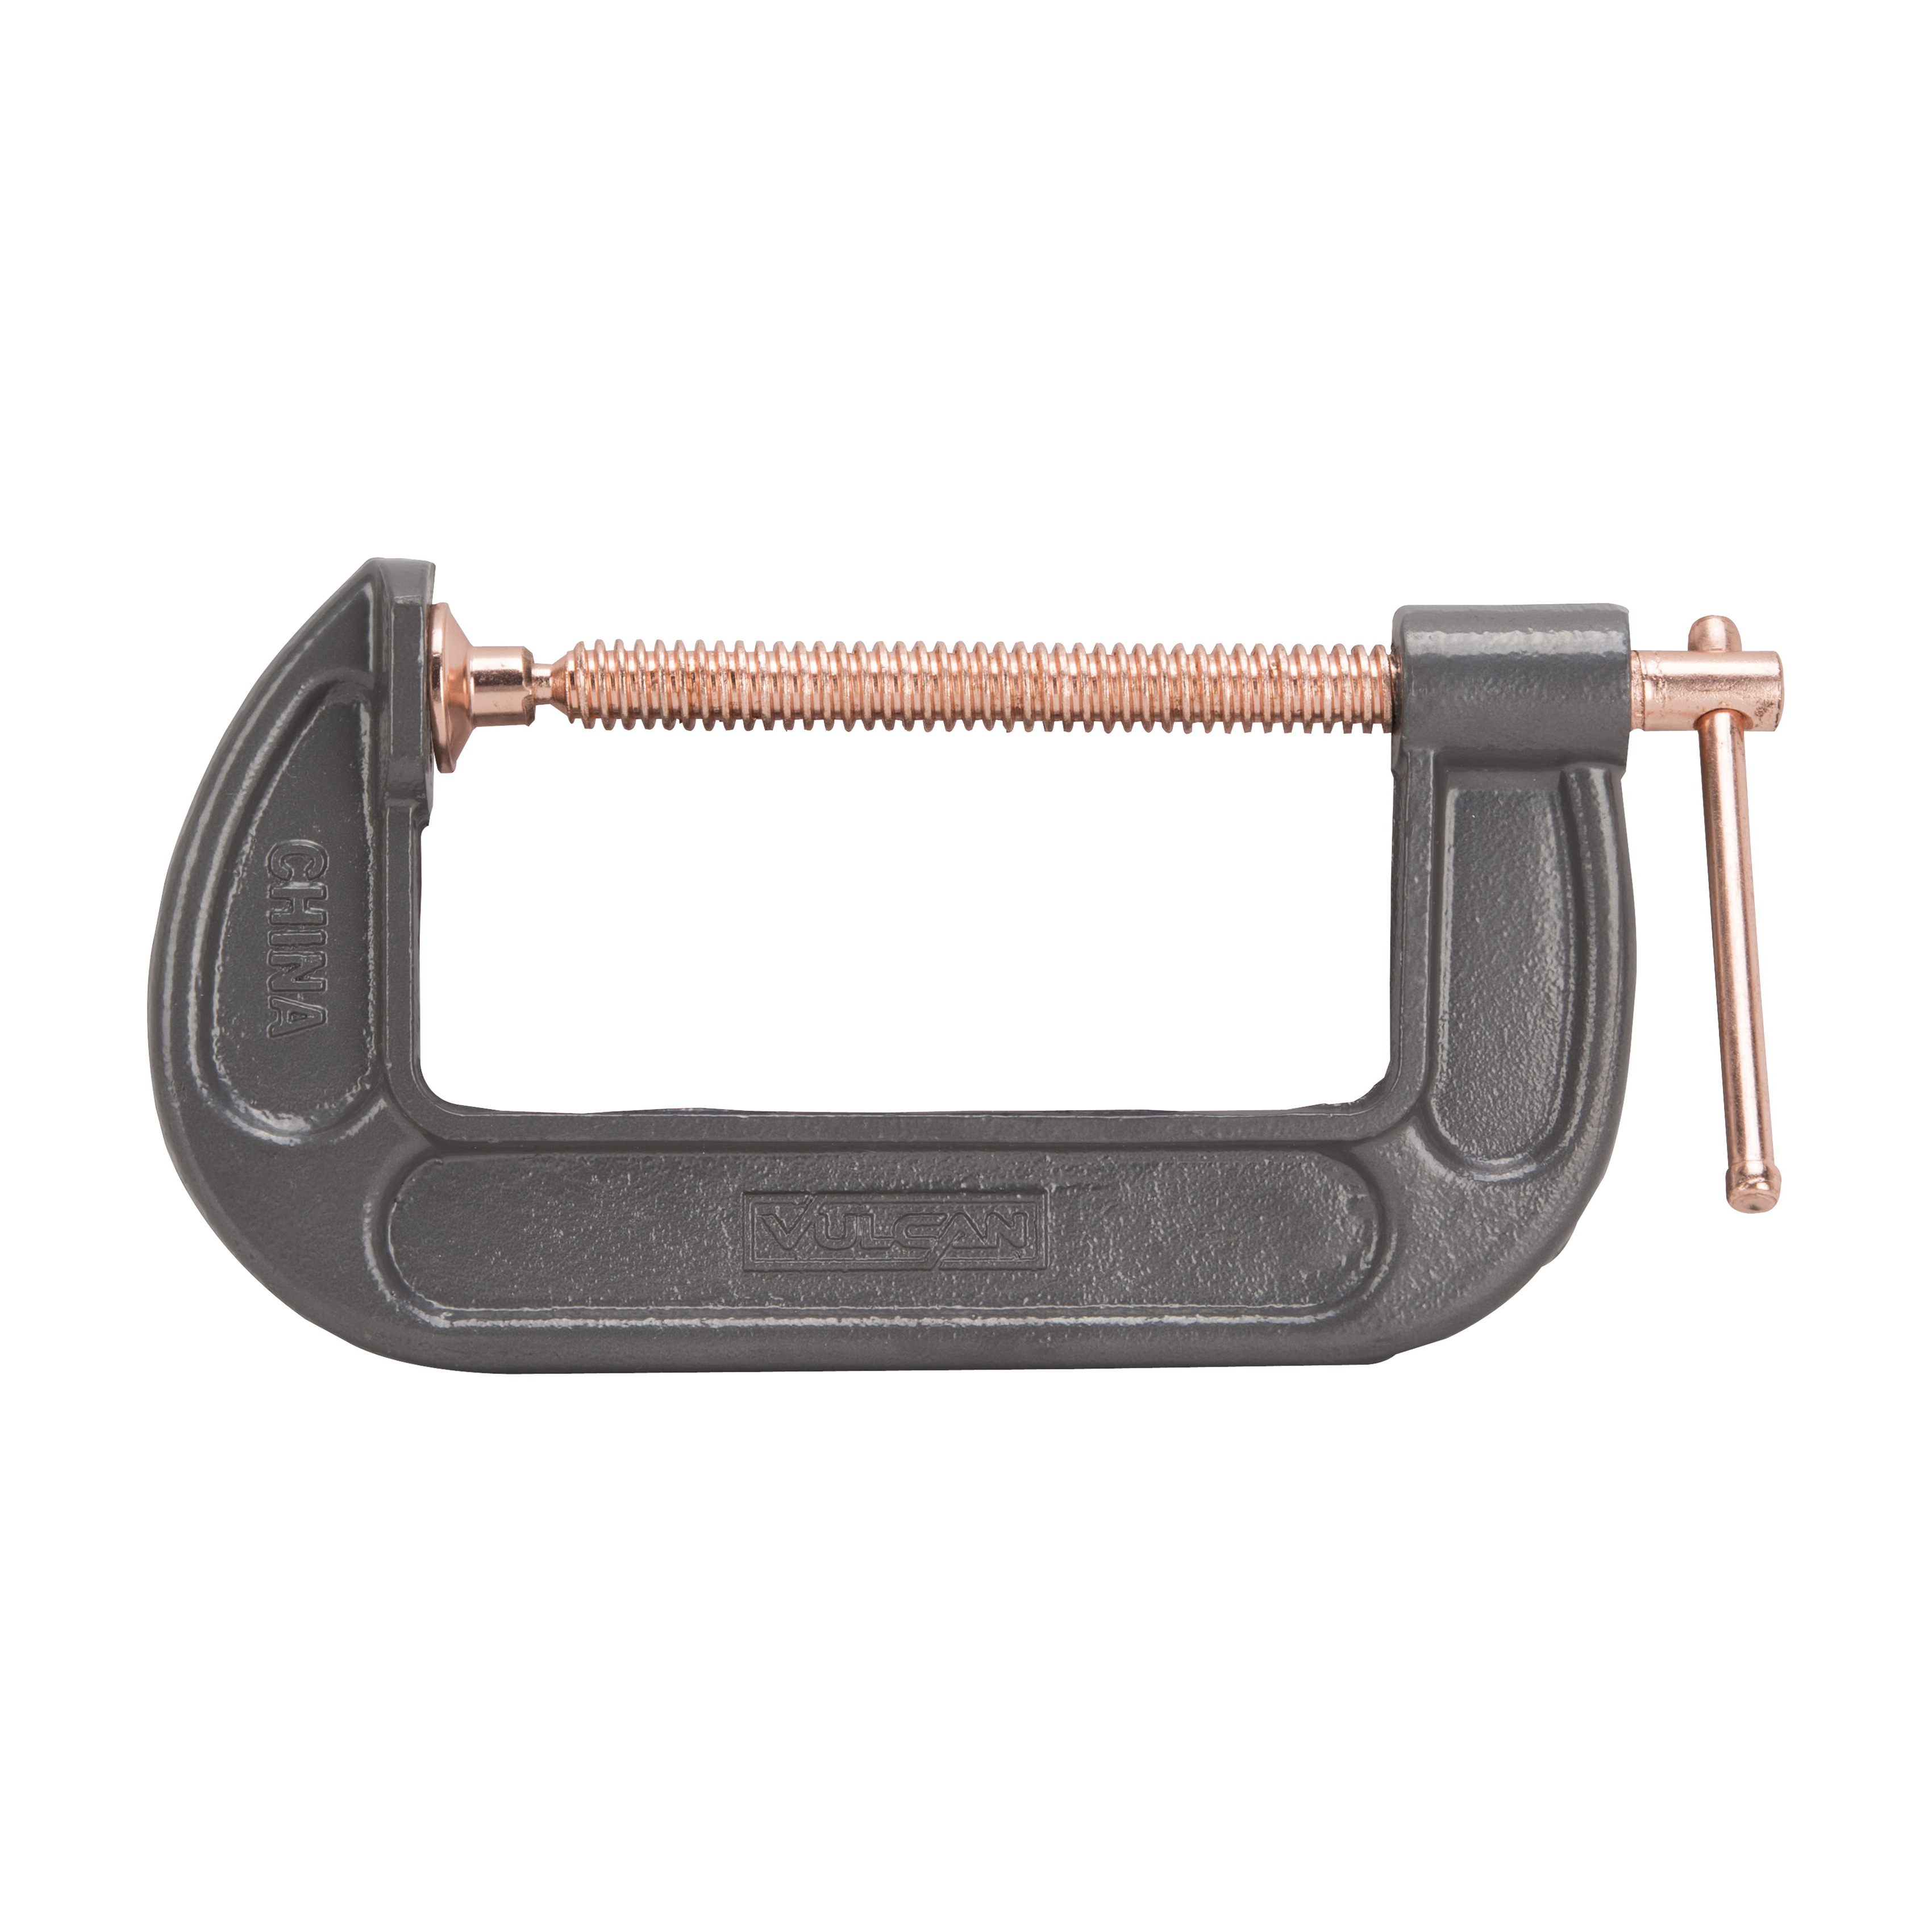 JL27364 C-Clamp, 5 in Max Opening Size, 2-3/8 in D Throat, Steel Body, Gray Body